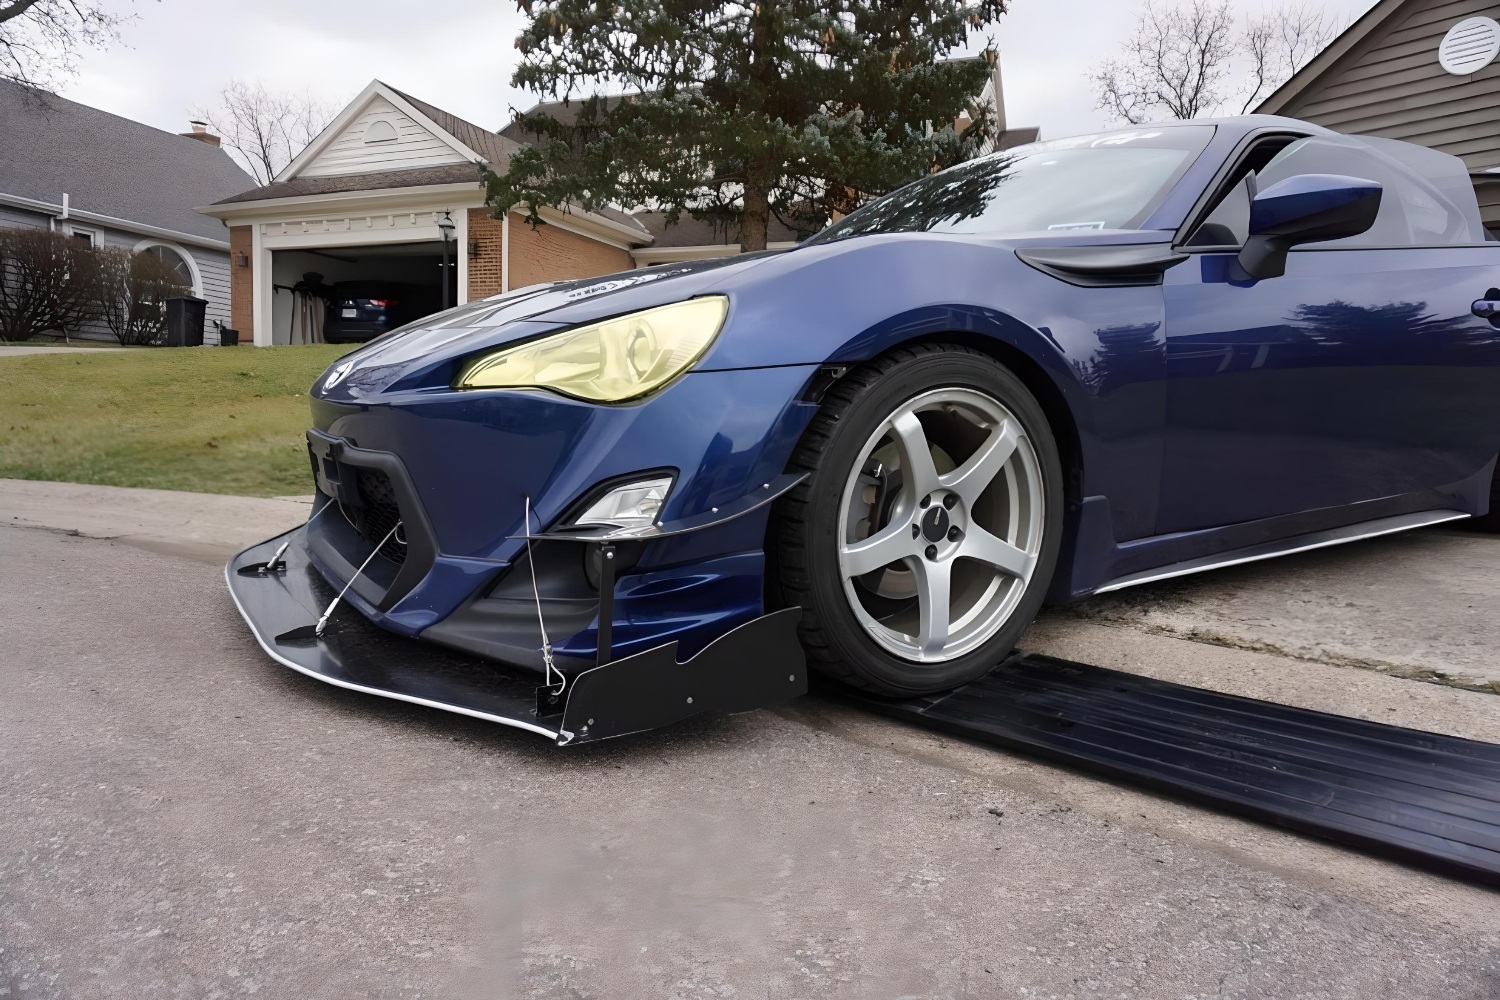 Curb ramp solution for low cars